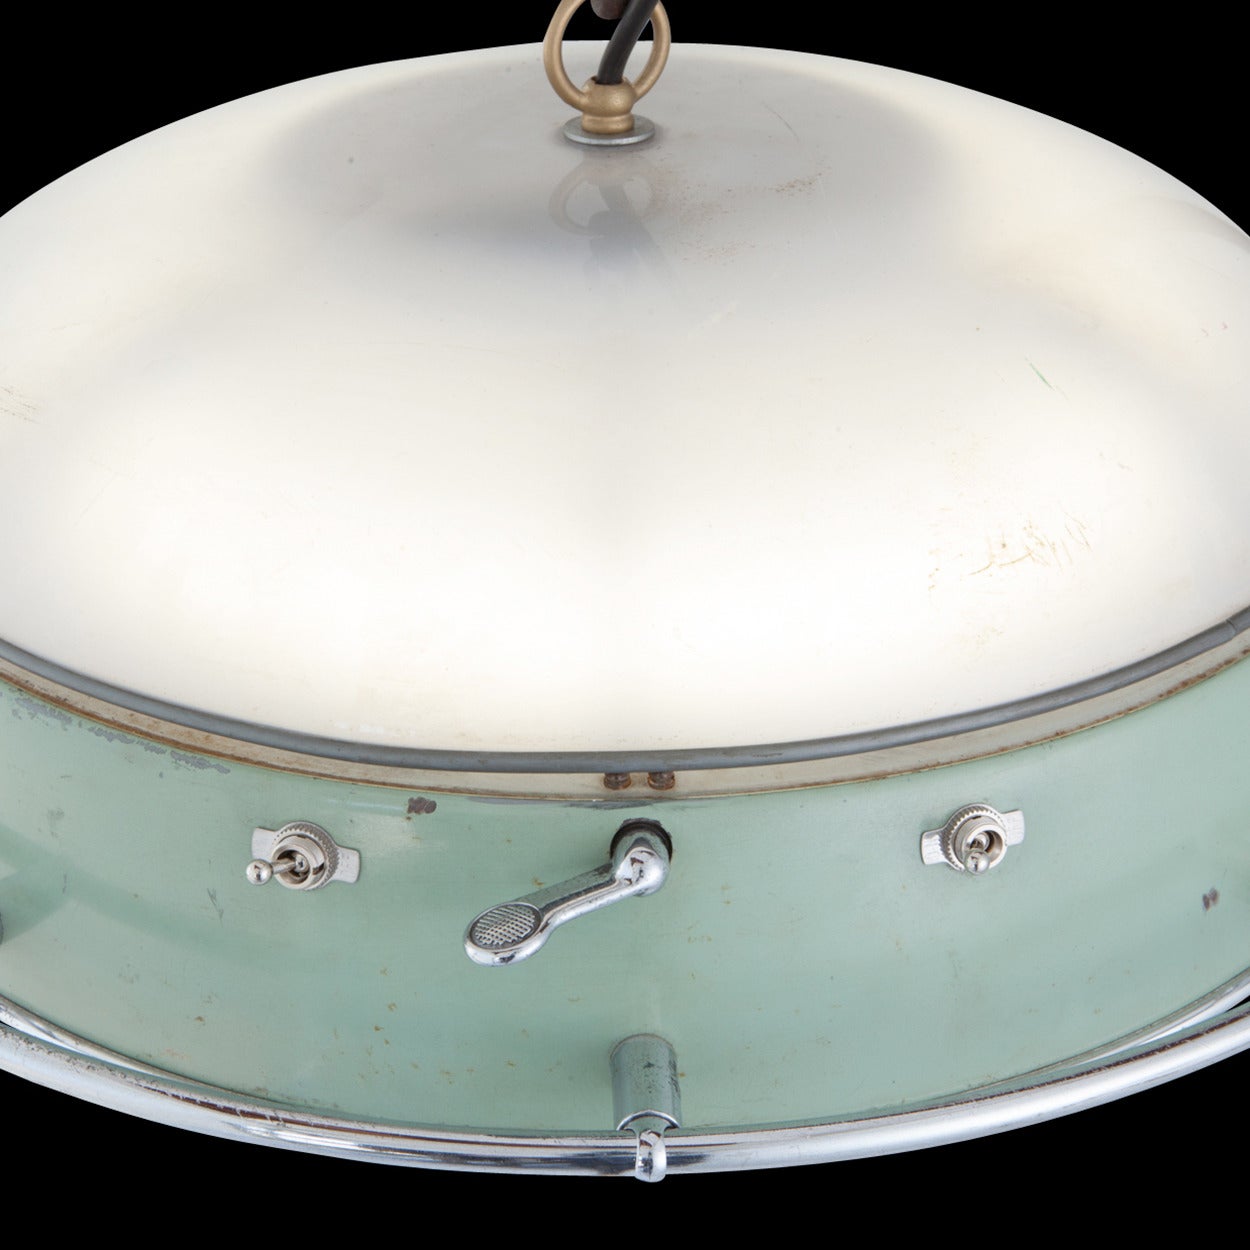 Pendant light with original green and cream paint. This light takes one circular halogen bulb and one standard socket bulb.

Made in England circa 1950.